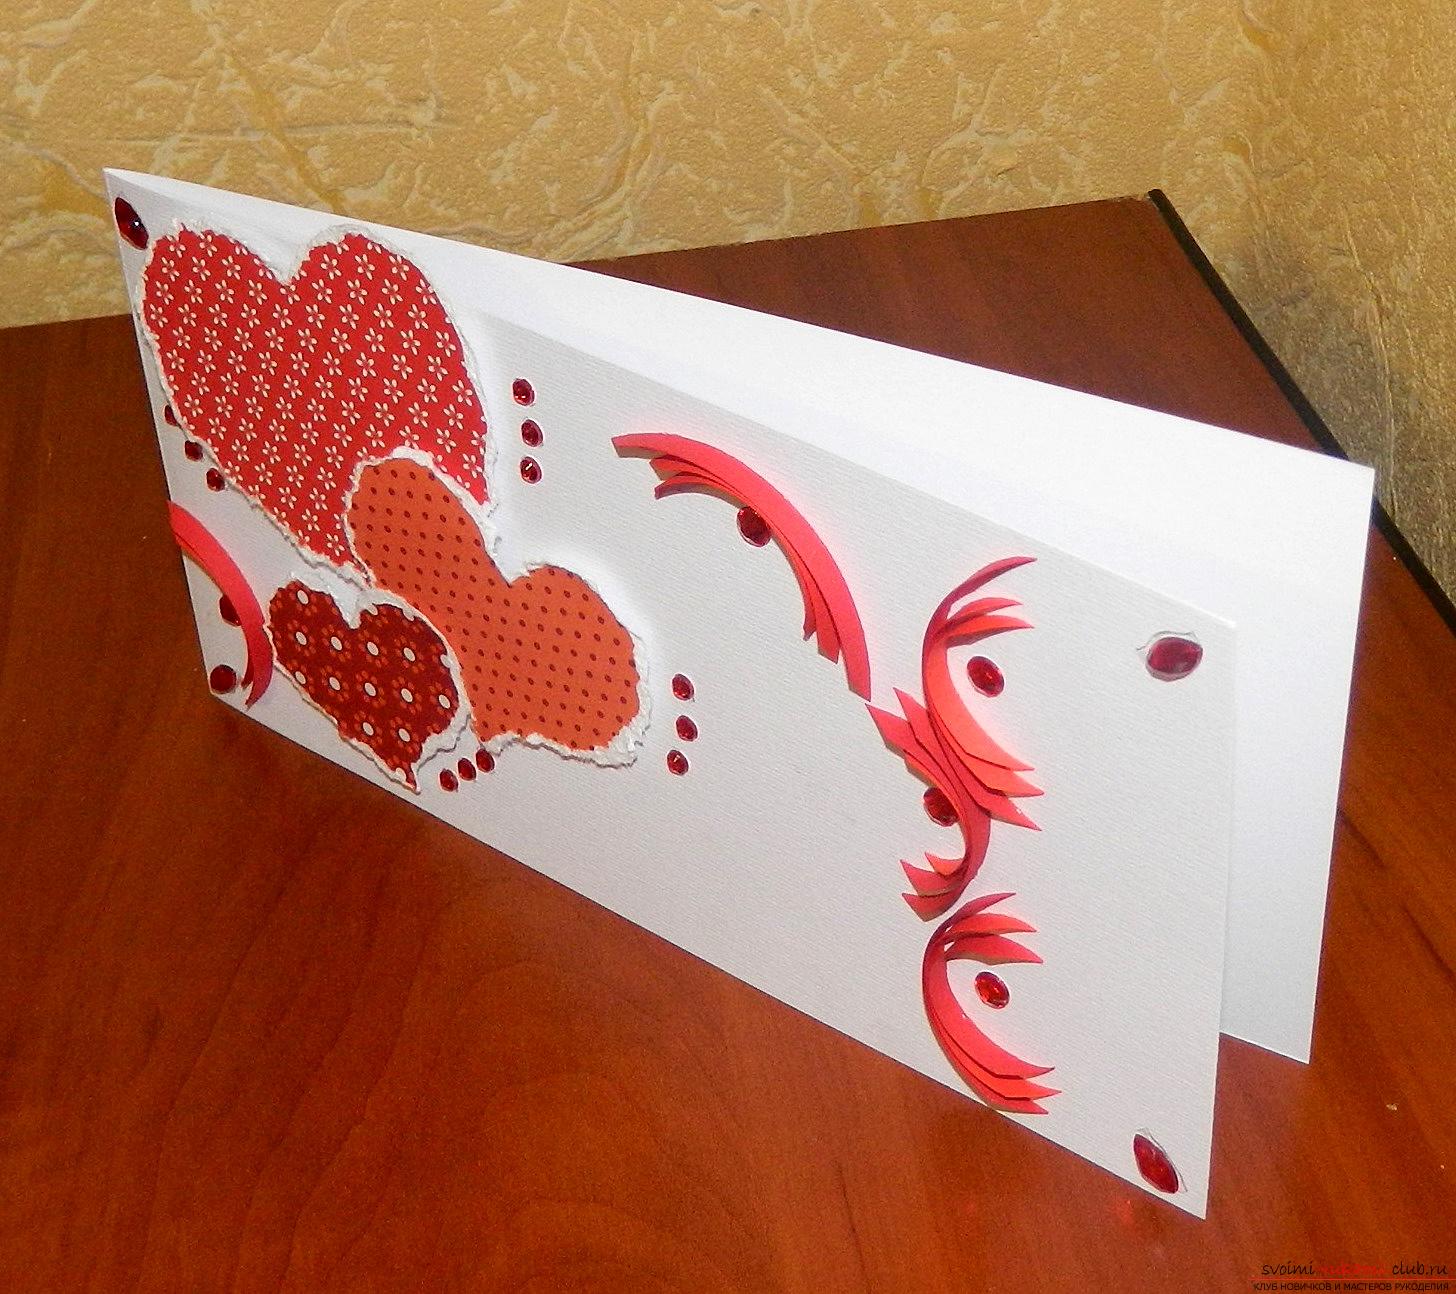 This master class will tell you how to make your own cards for Valentine's Day. Picture number 1